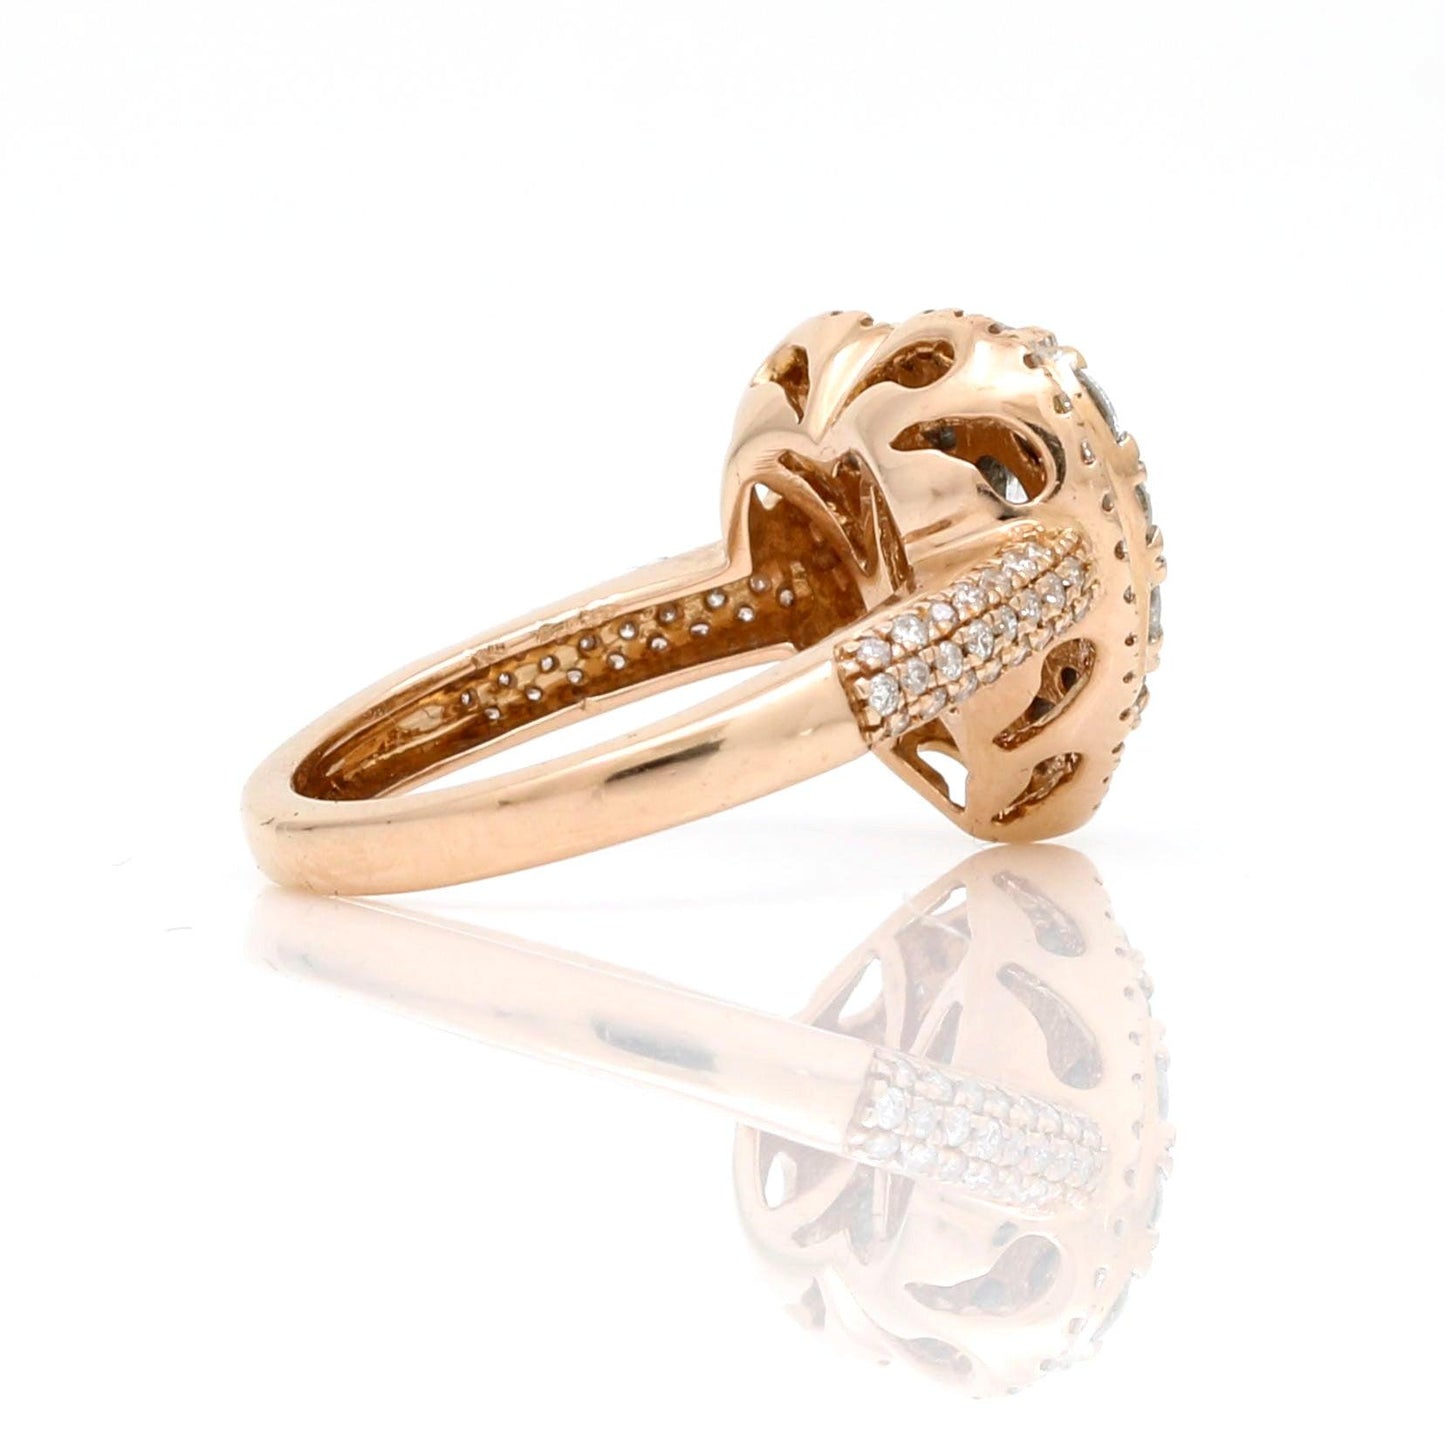 Pave Diamond Heart Shaped Ring in 14k Rose Gold - 31 Jewels Inc.